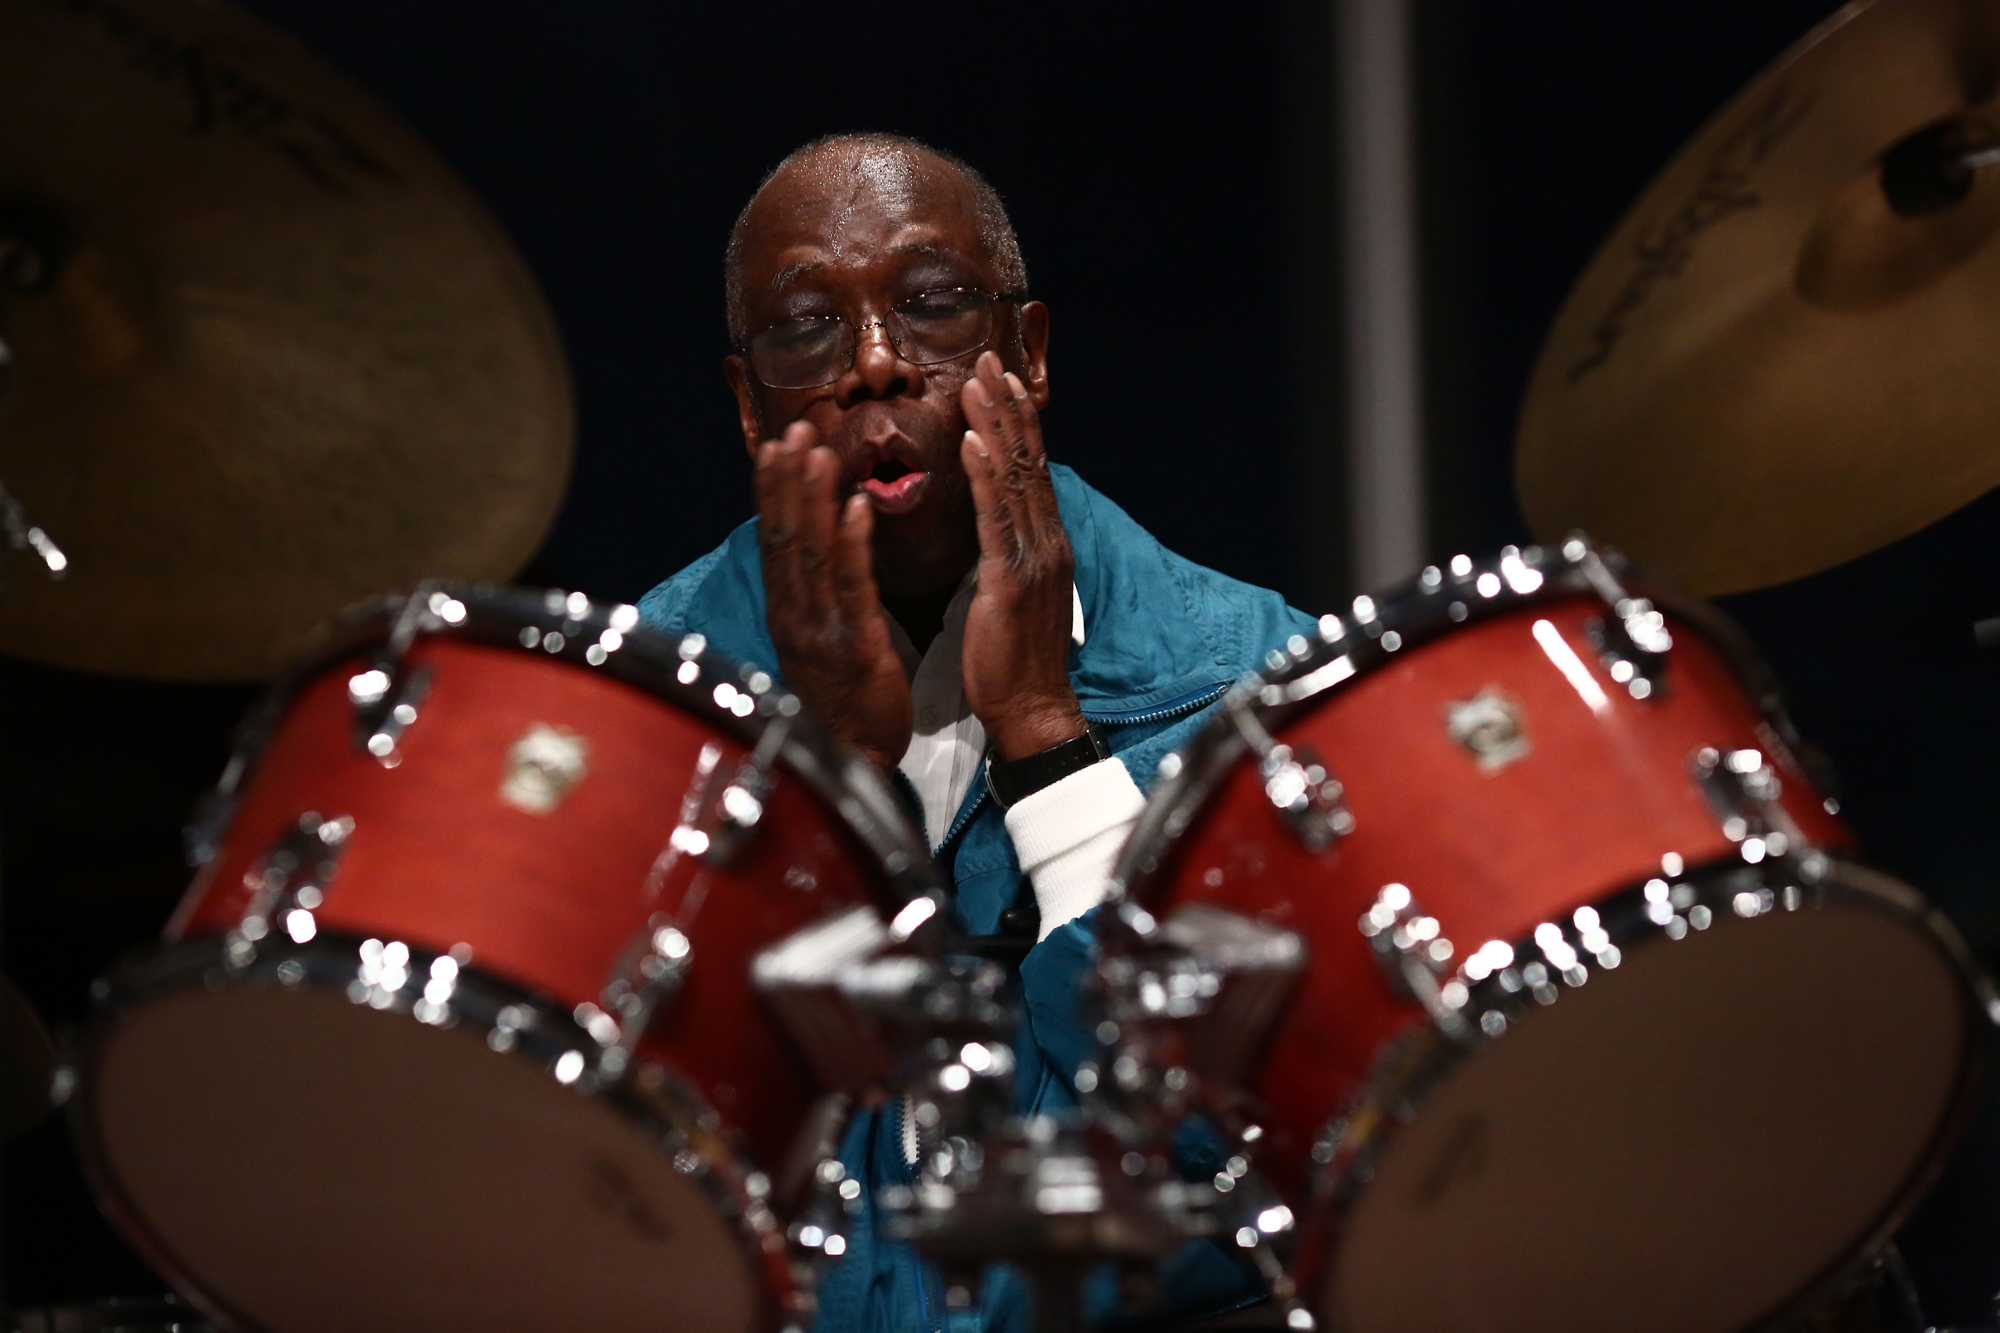 Andrew Cyrille with his hands on his cheeks in front of a drum set at his solo performance during Open Plan: Cecil Taylor, April 16 2016 at The Whitney Museum of American Art. Photograph © Paula Court, courtesy Whitney Museum of American Art